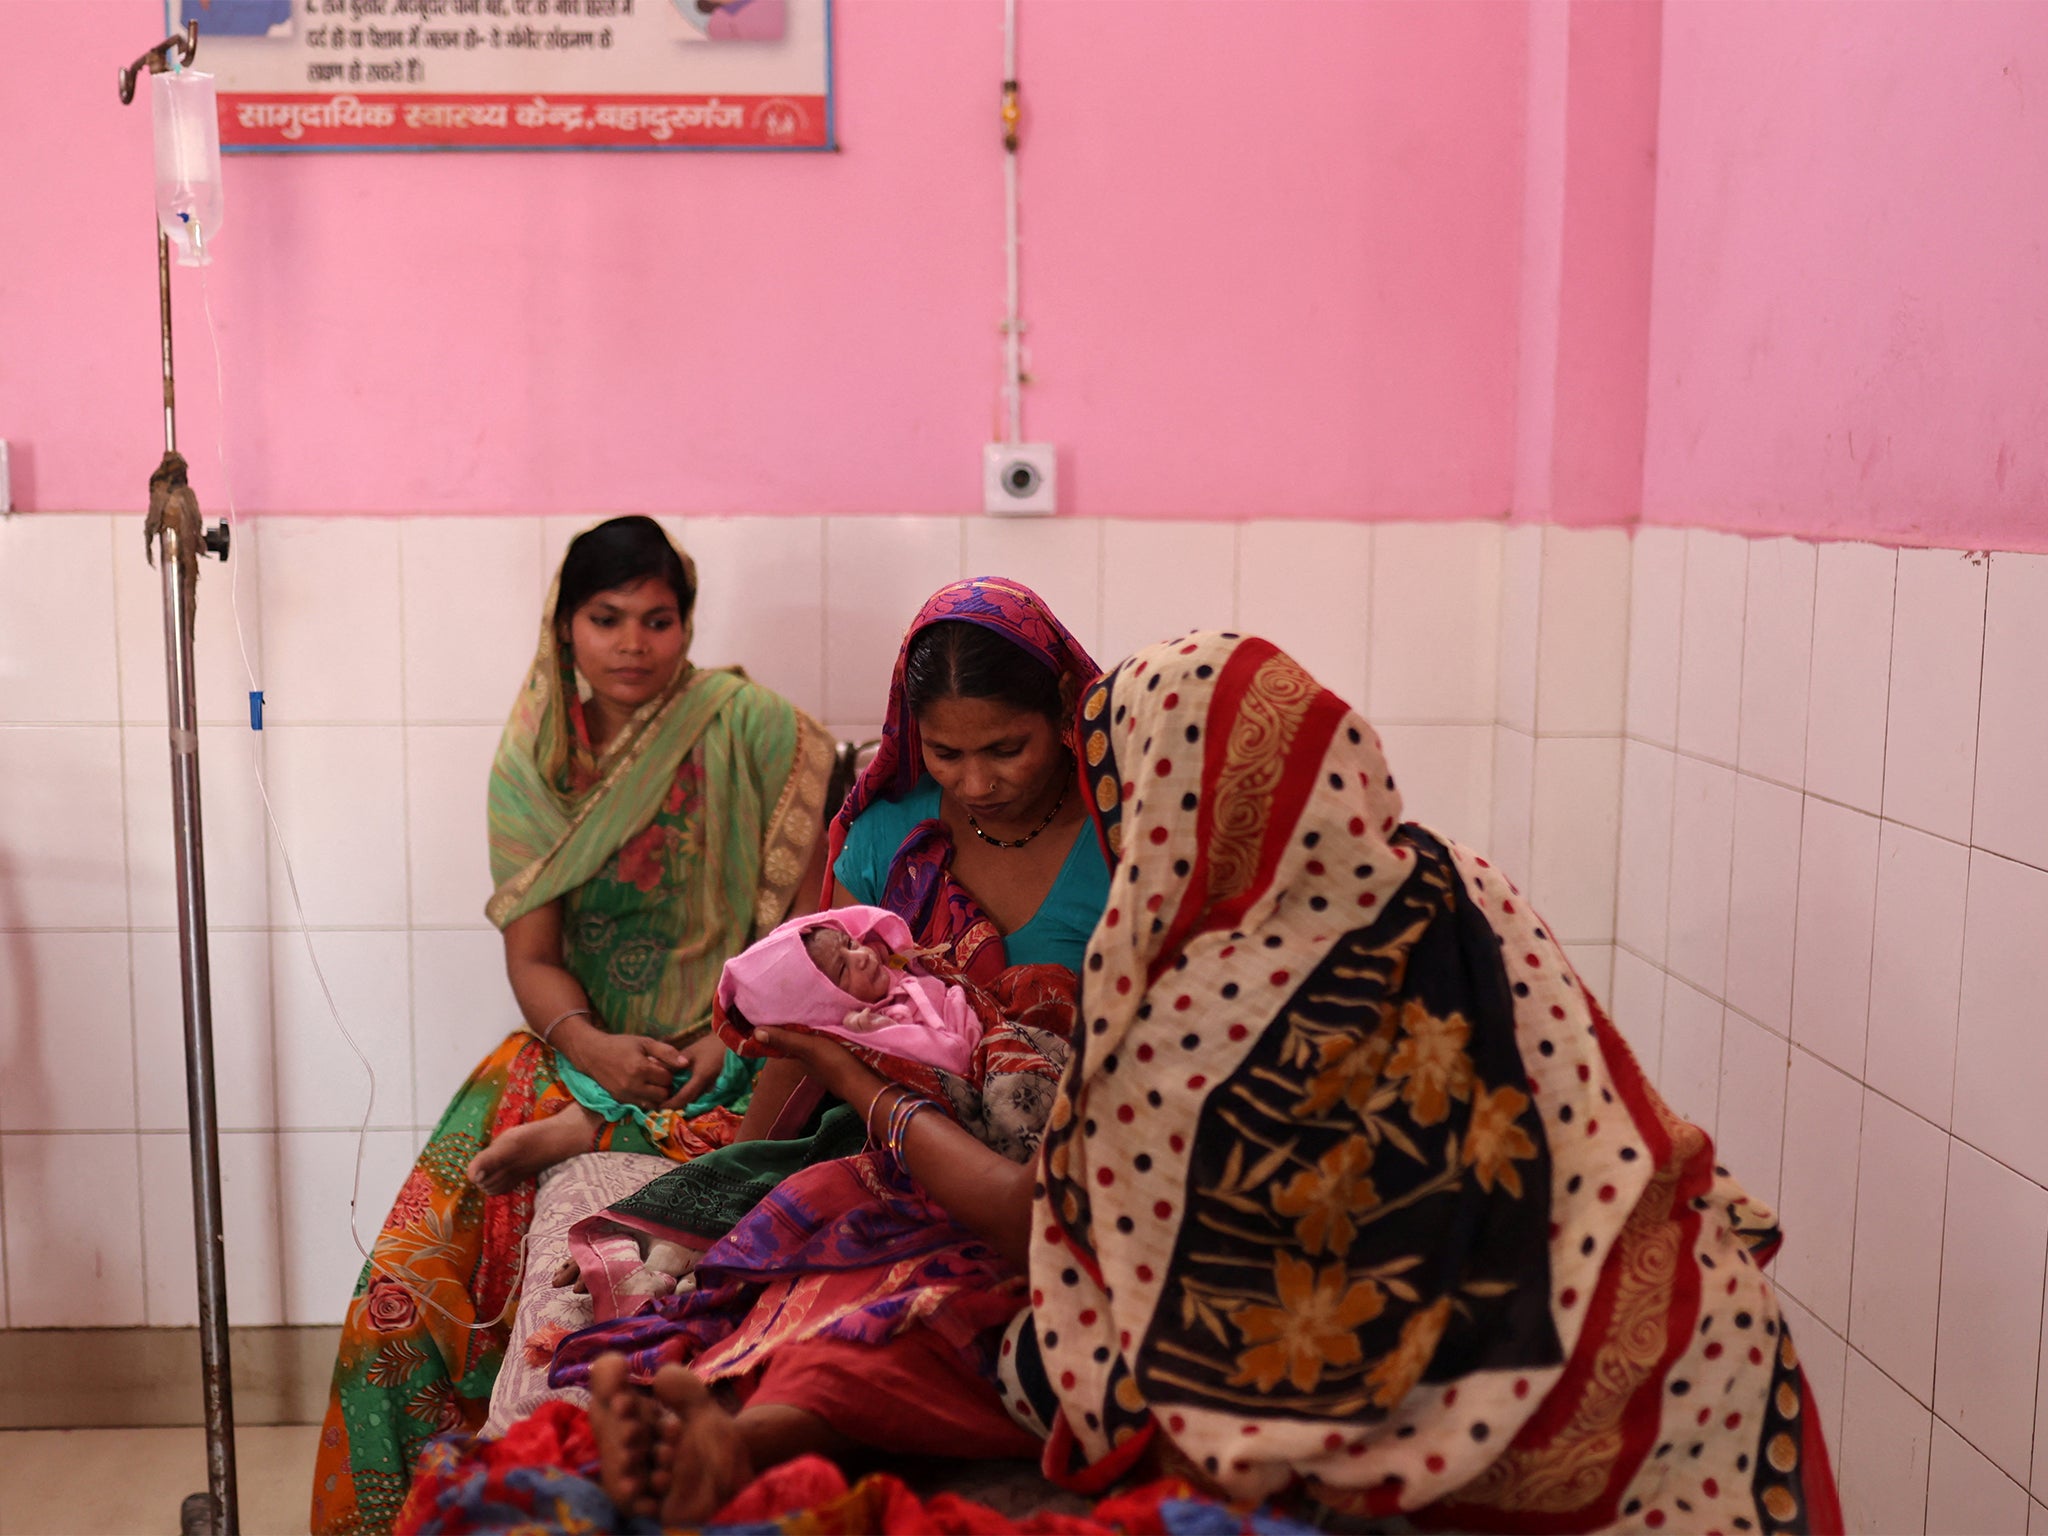 Zamerun Nisha, 33, holds her newborn baby on the maternity ward of a community health centre in the state of Bihar, India